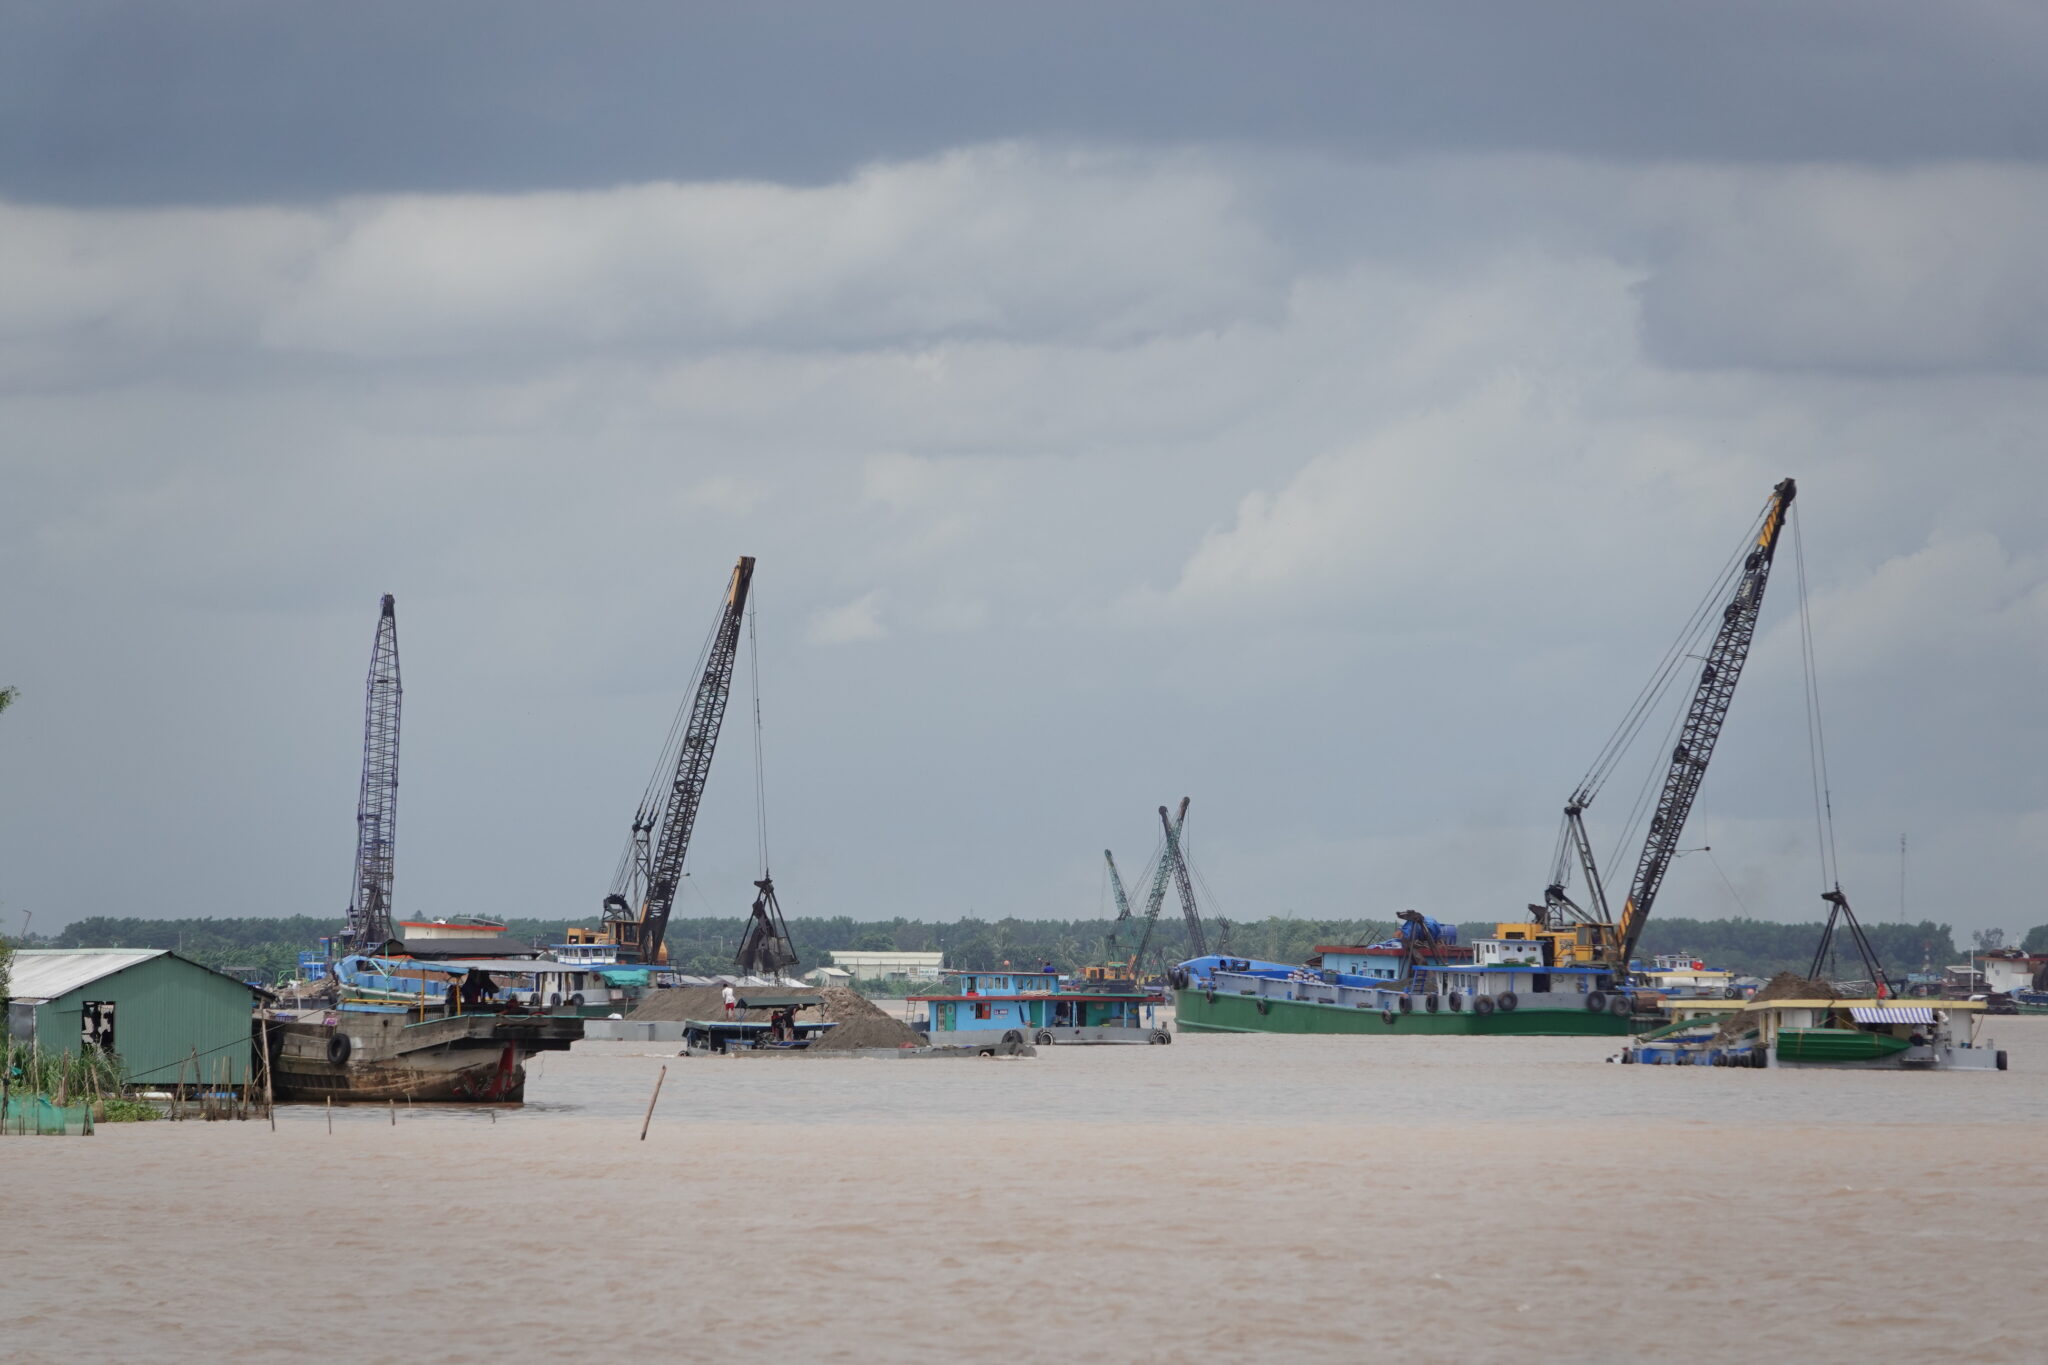 Sand dredgers on the Hau River in An Giang province, Vietnam